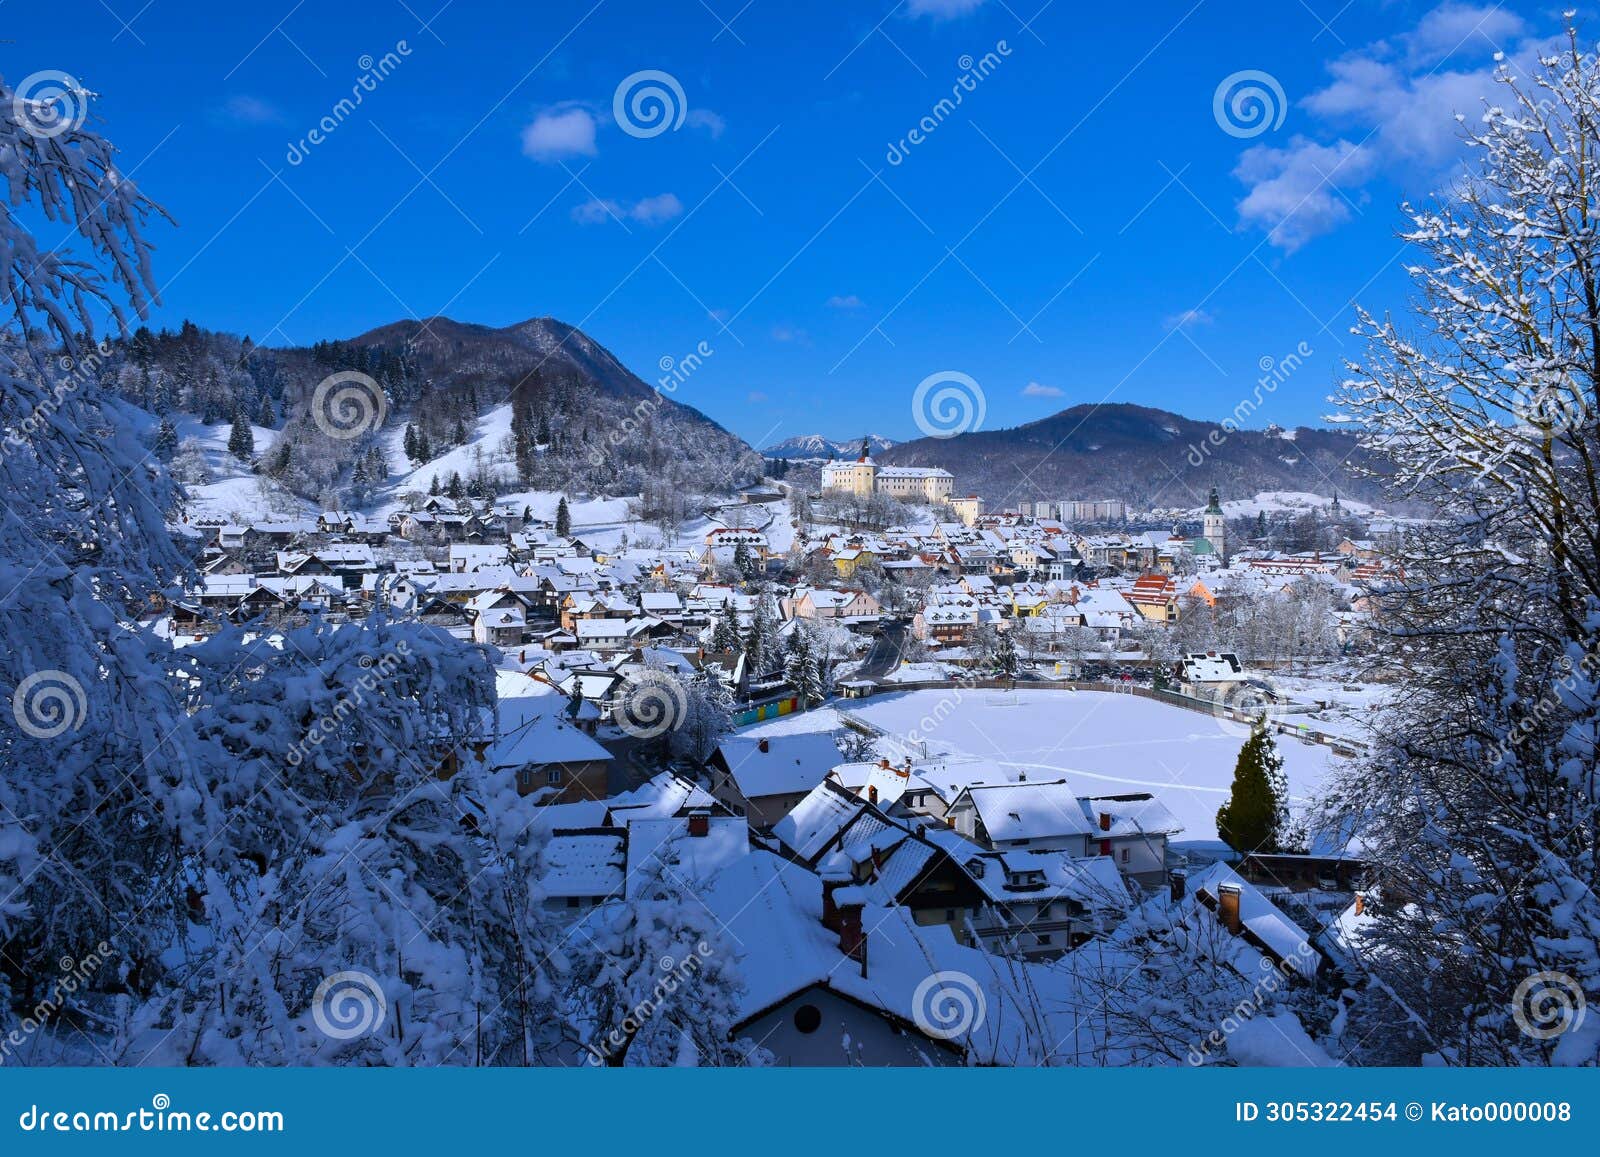 view of the town of skofja loka and the castle above in gorenjska, slovenia